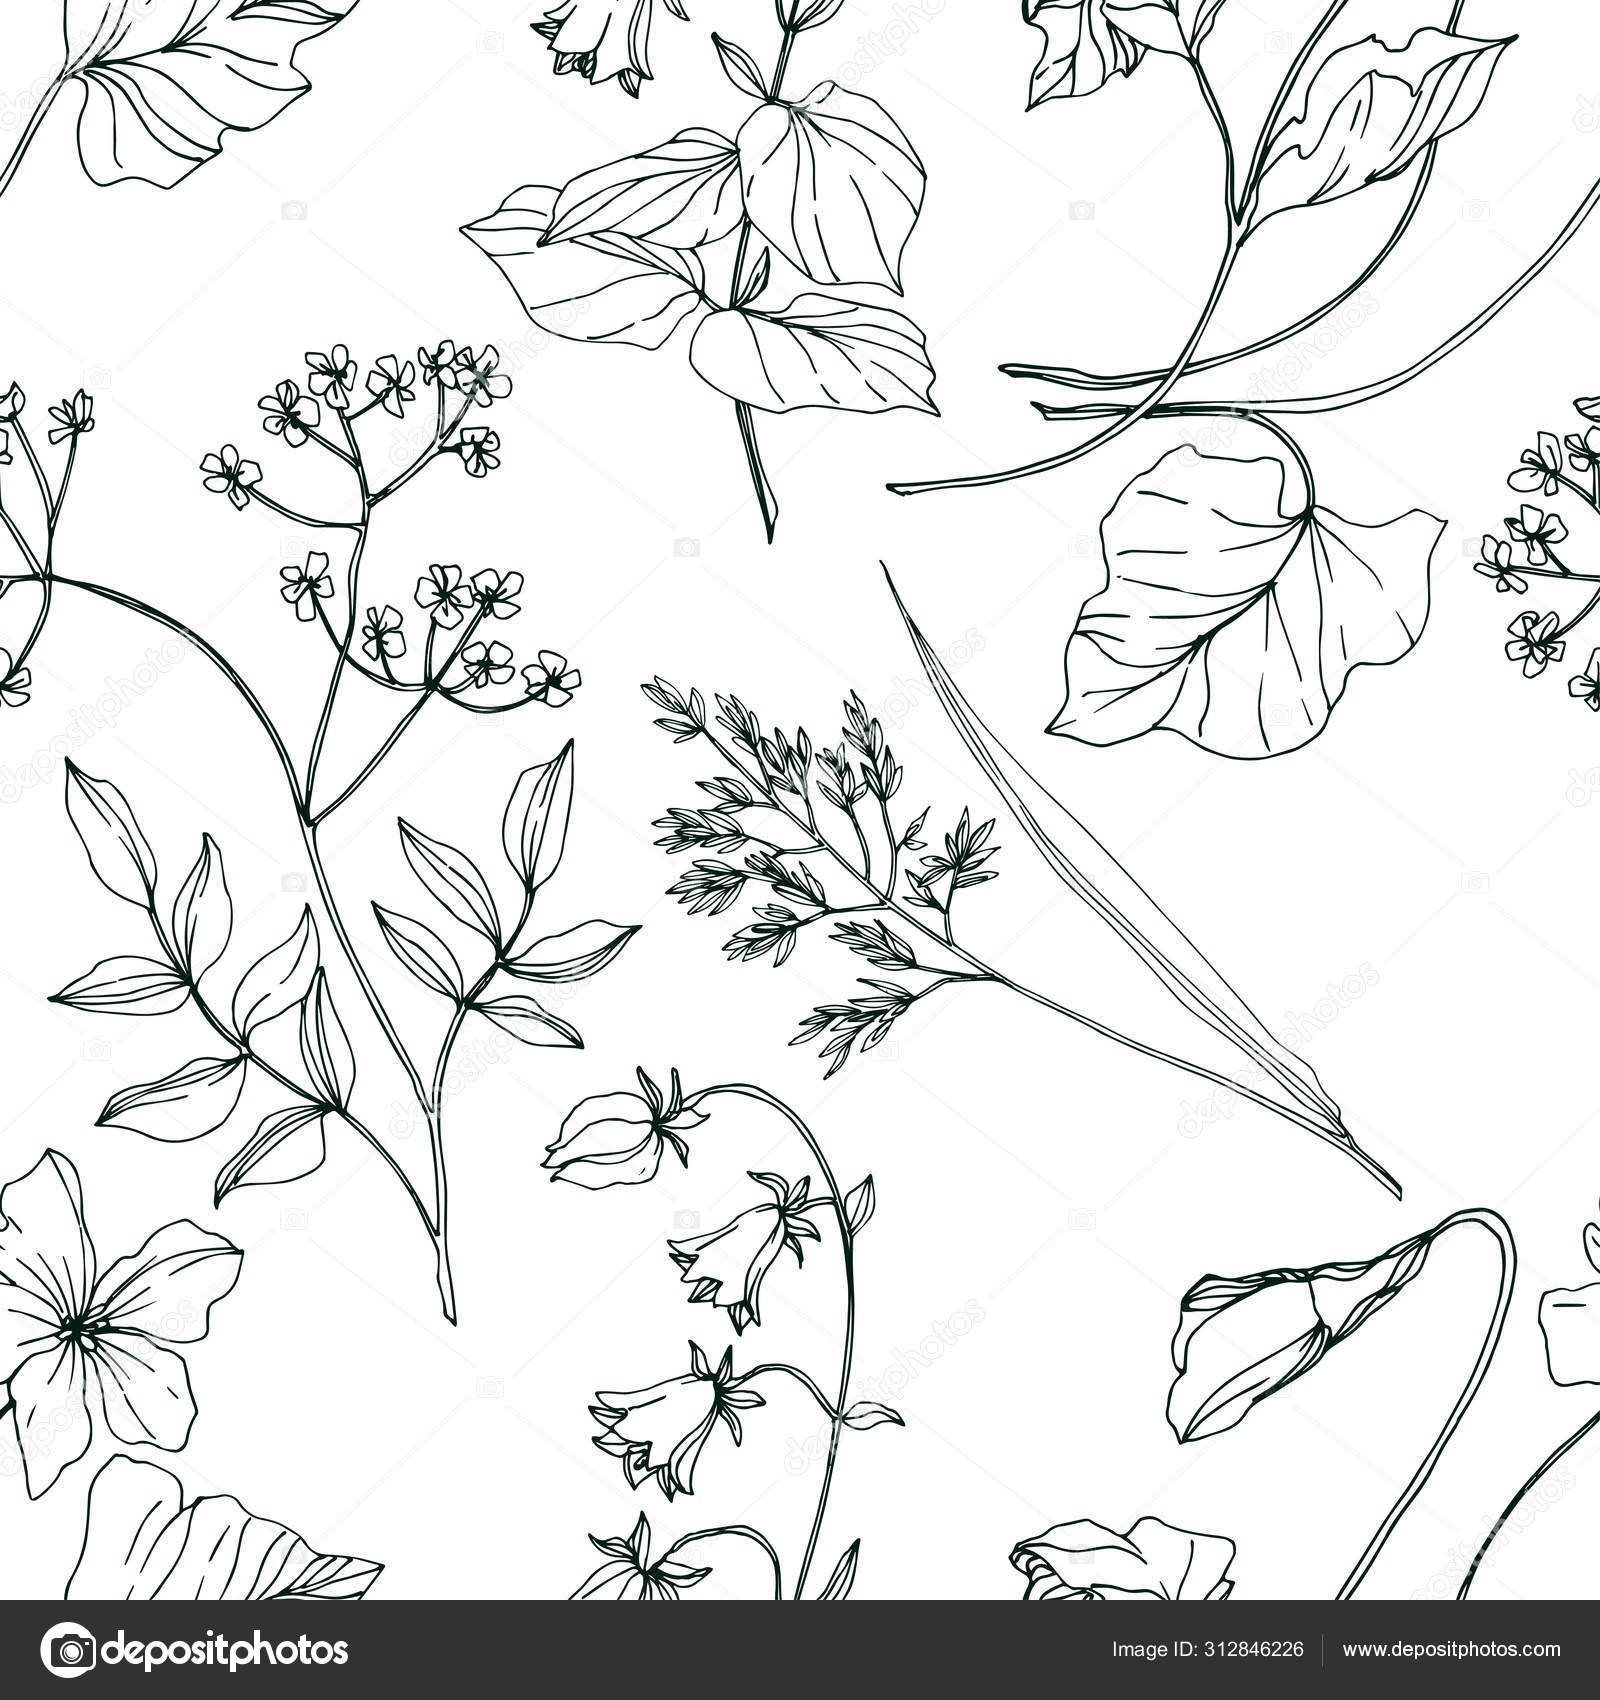 Vector Wildflowers Floral Botanical Flowers Black And White Engraved Ink Art Seamless Background Pattern Stock Vector Image By C Andreyanush